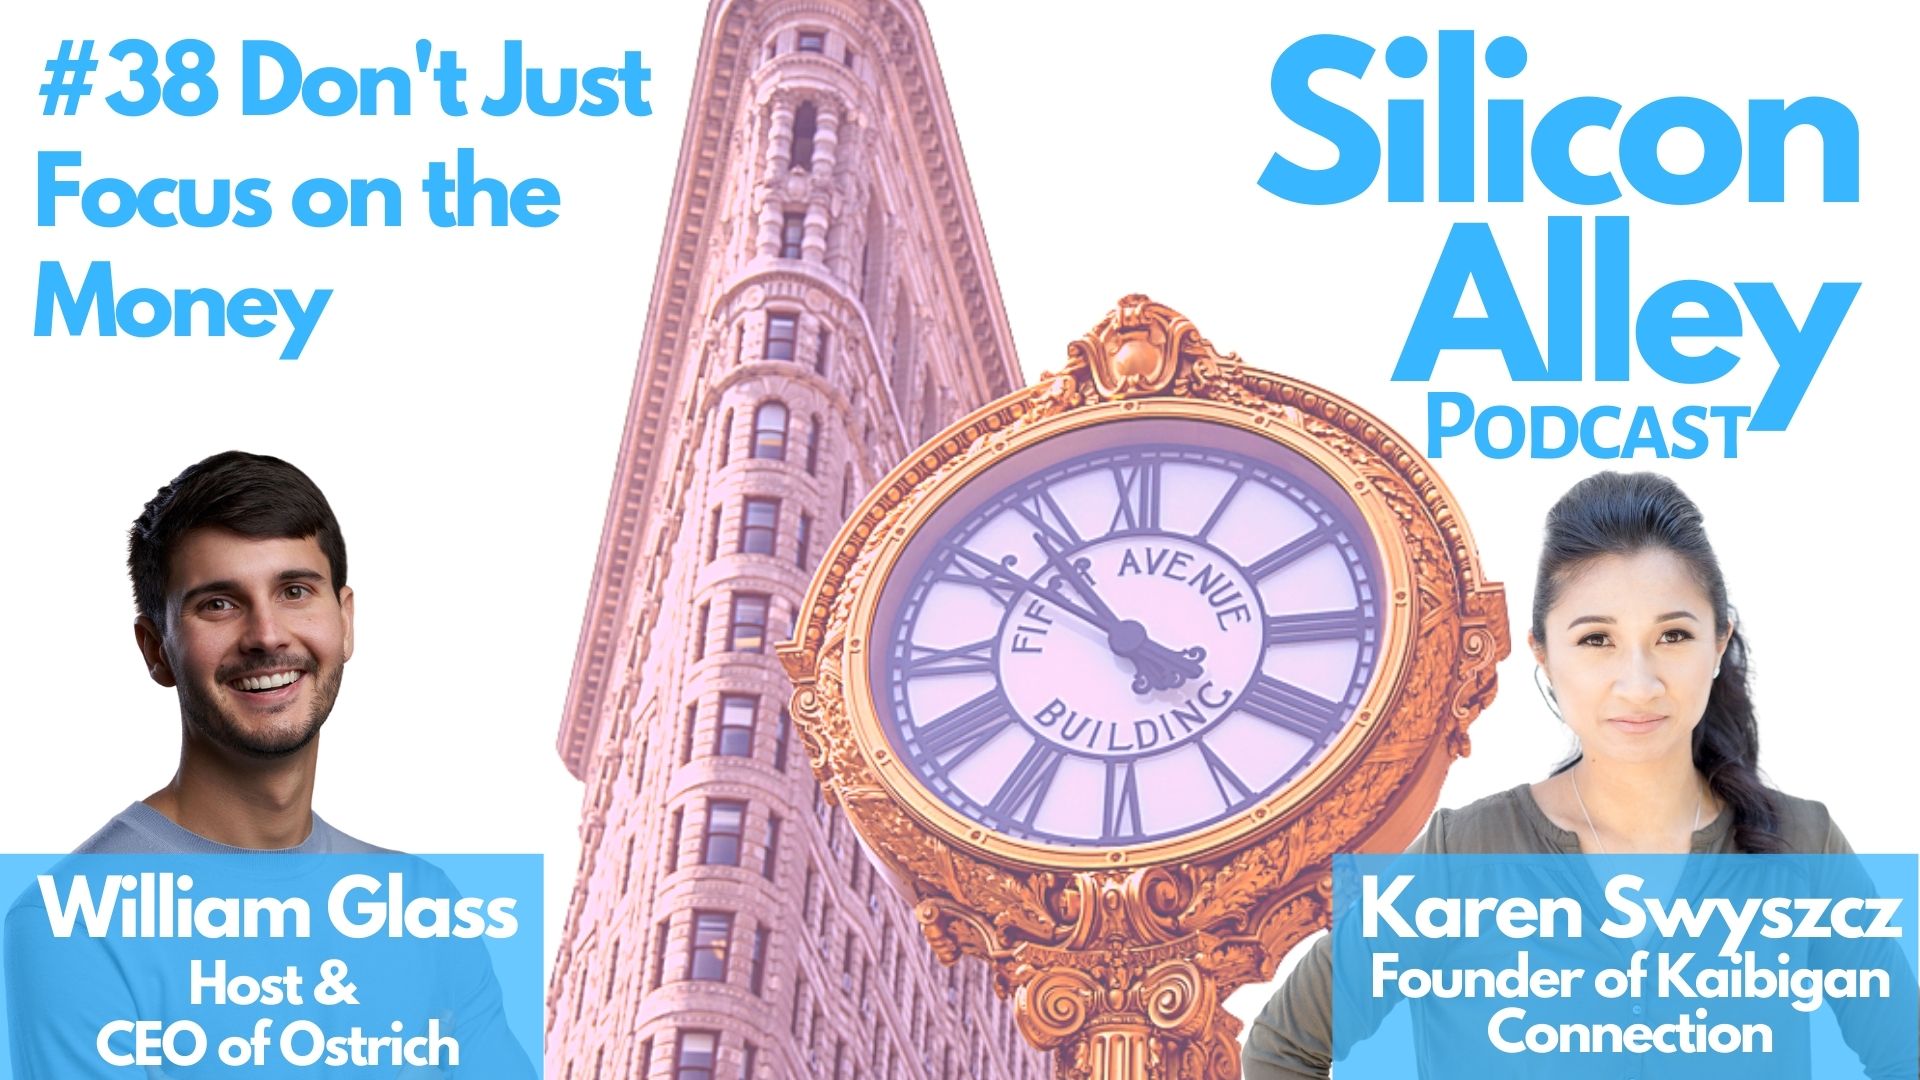 Don't Just Focus on the Money with Karen Swyszcz, Founder of Kaibigan Connection | Silicon Alley Podcast Episode 38 Cover Image